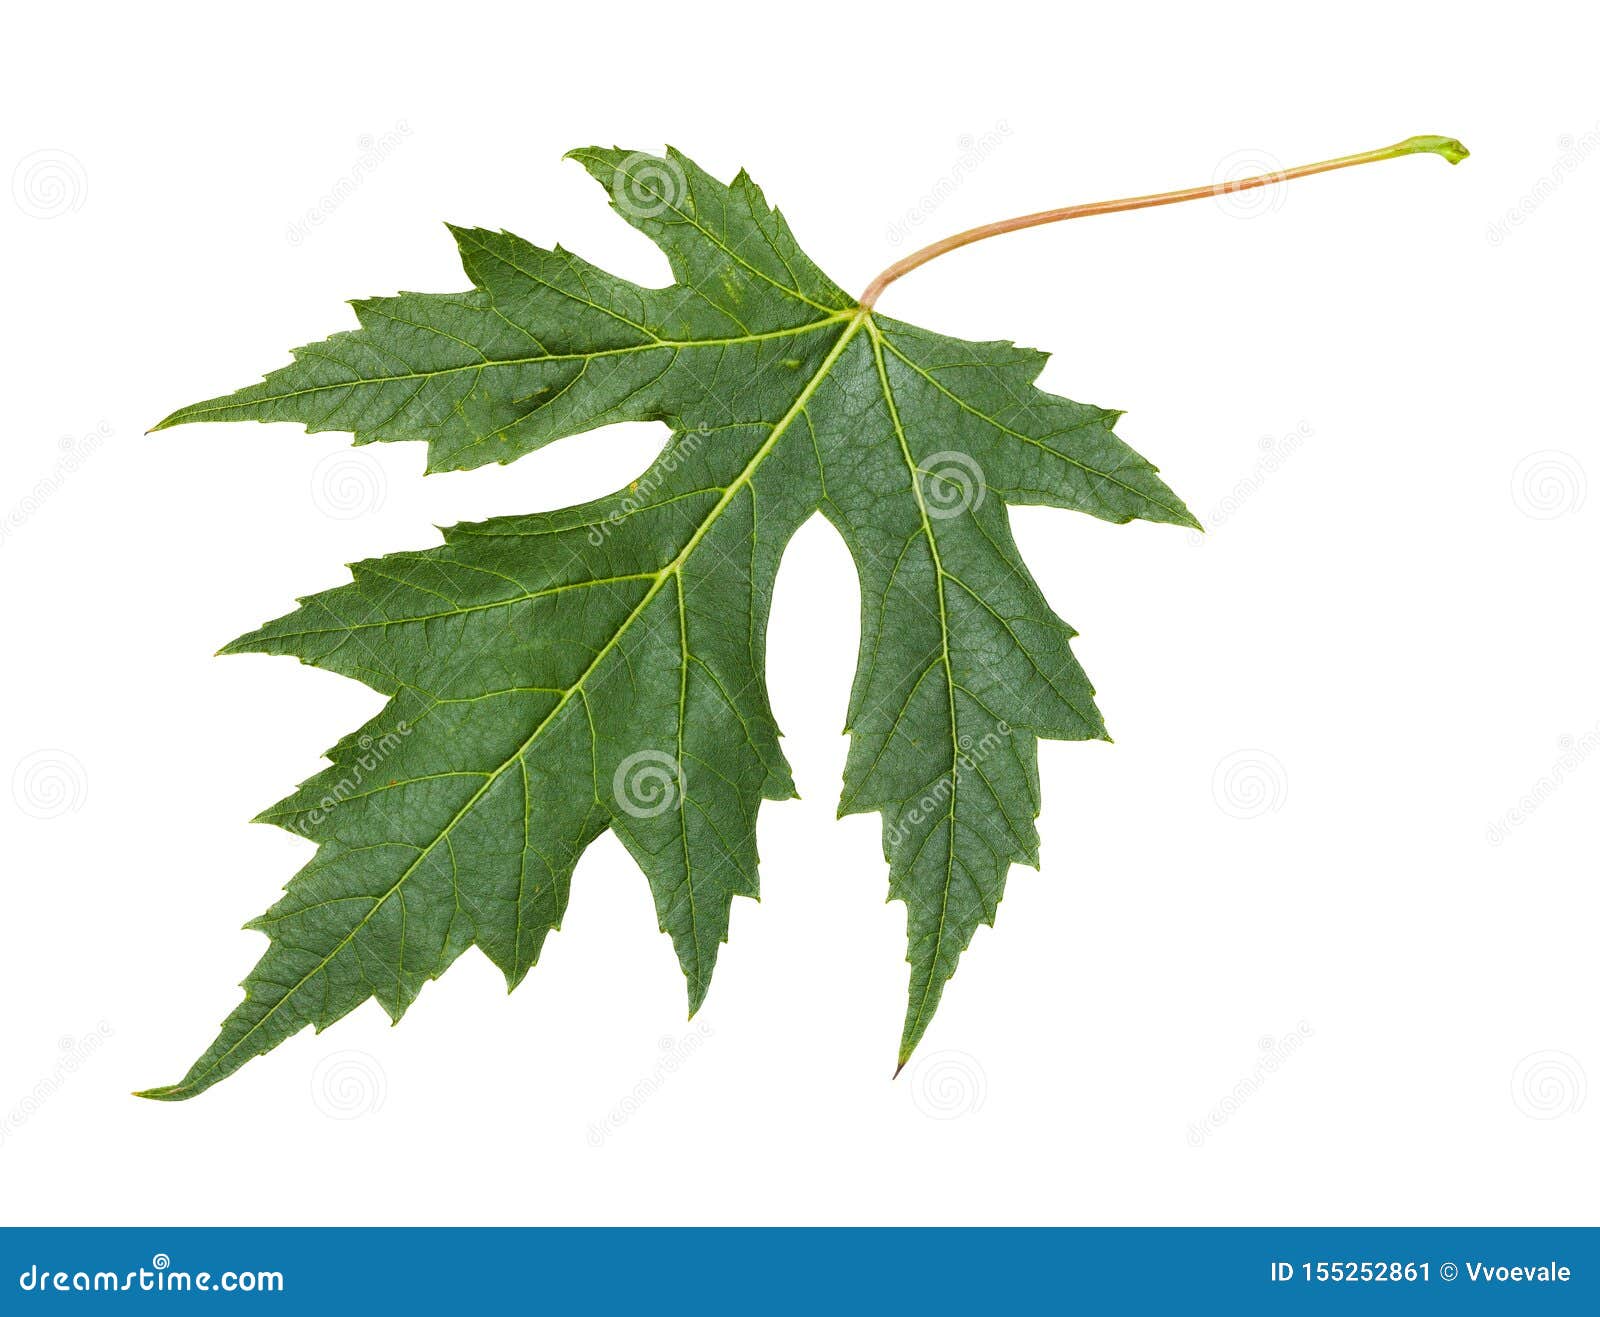 Fresh Leaf Of Silver Maple Tree Isolated Stock Image 